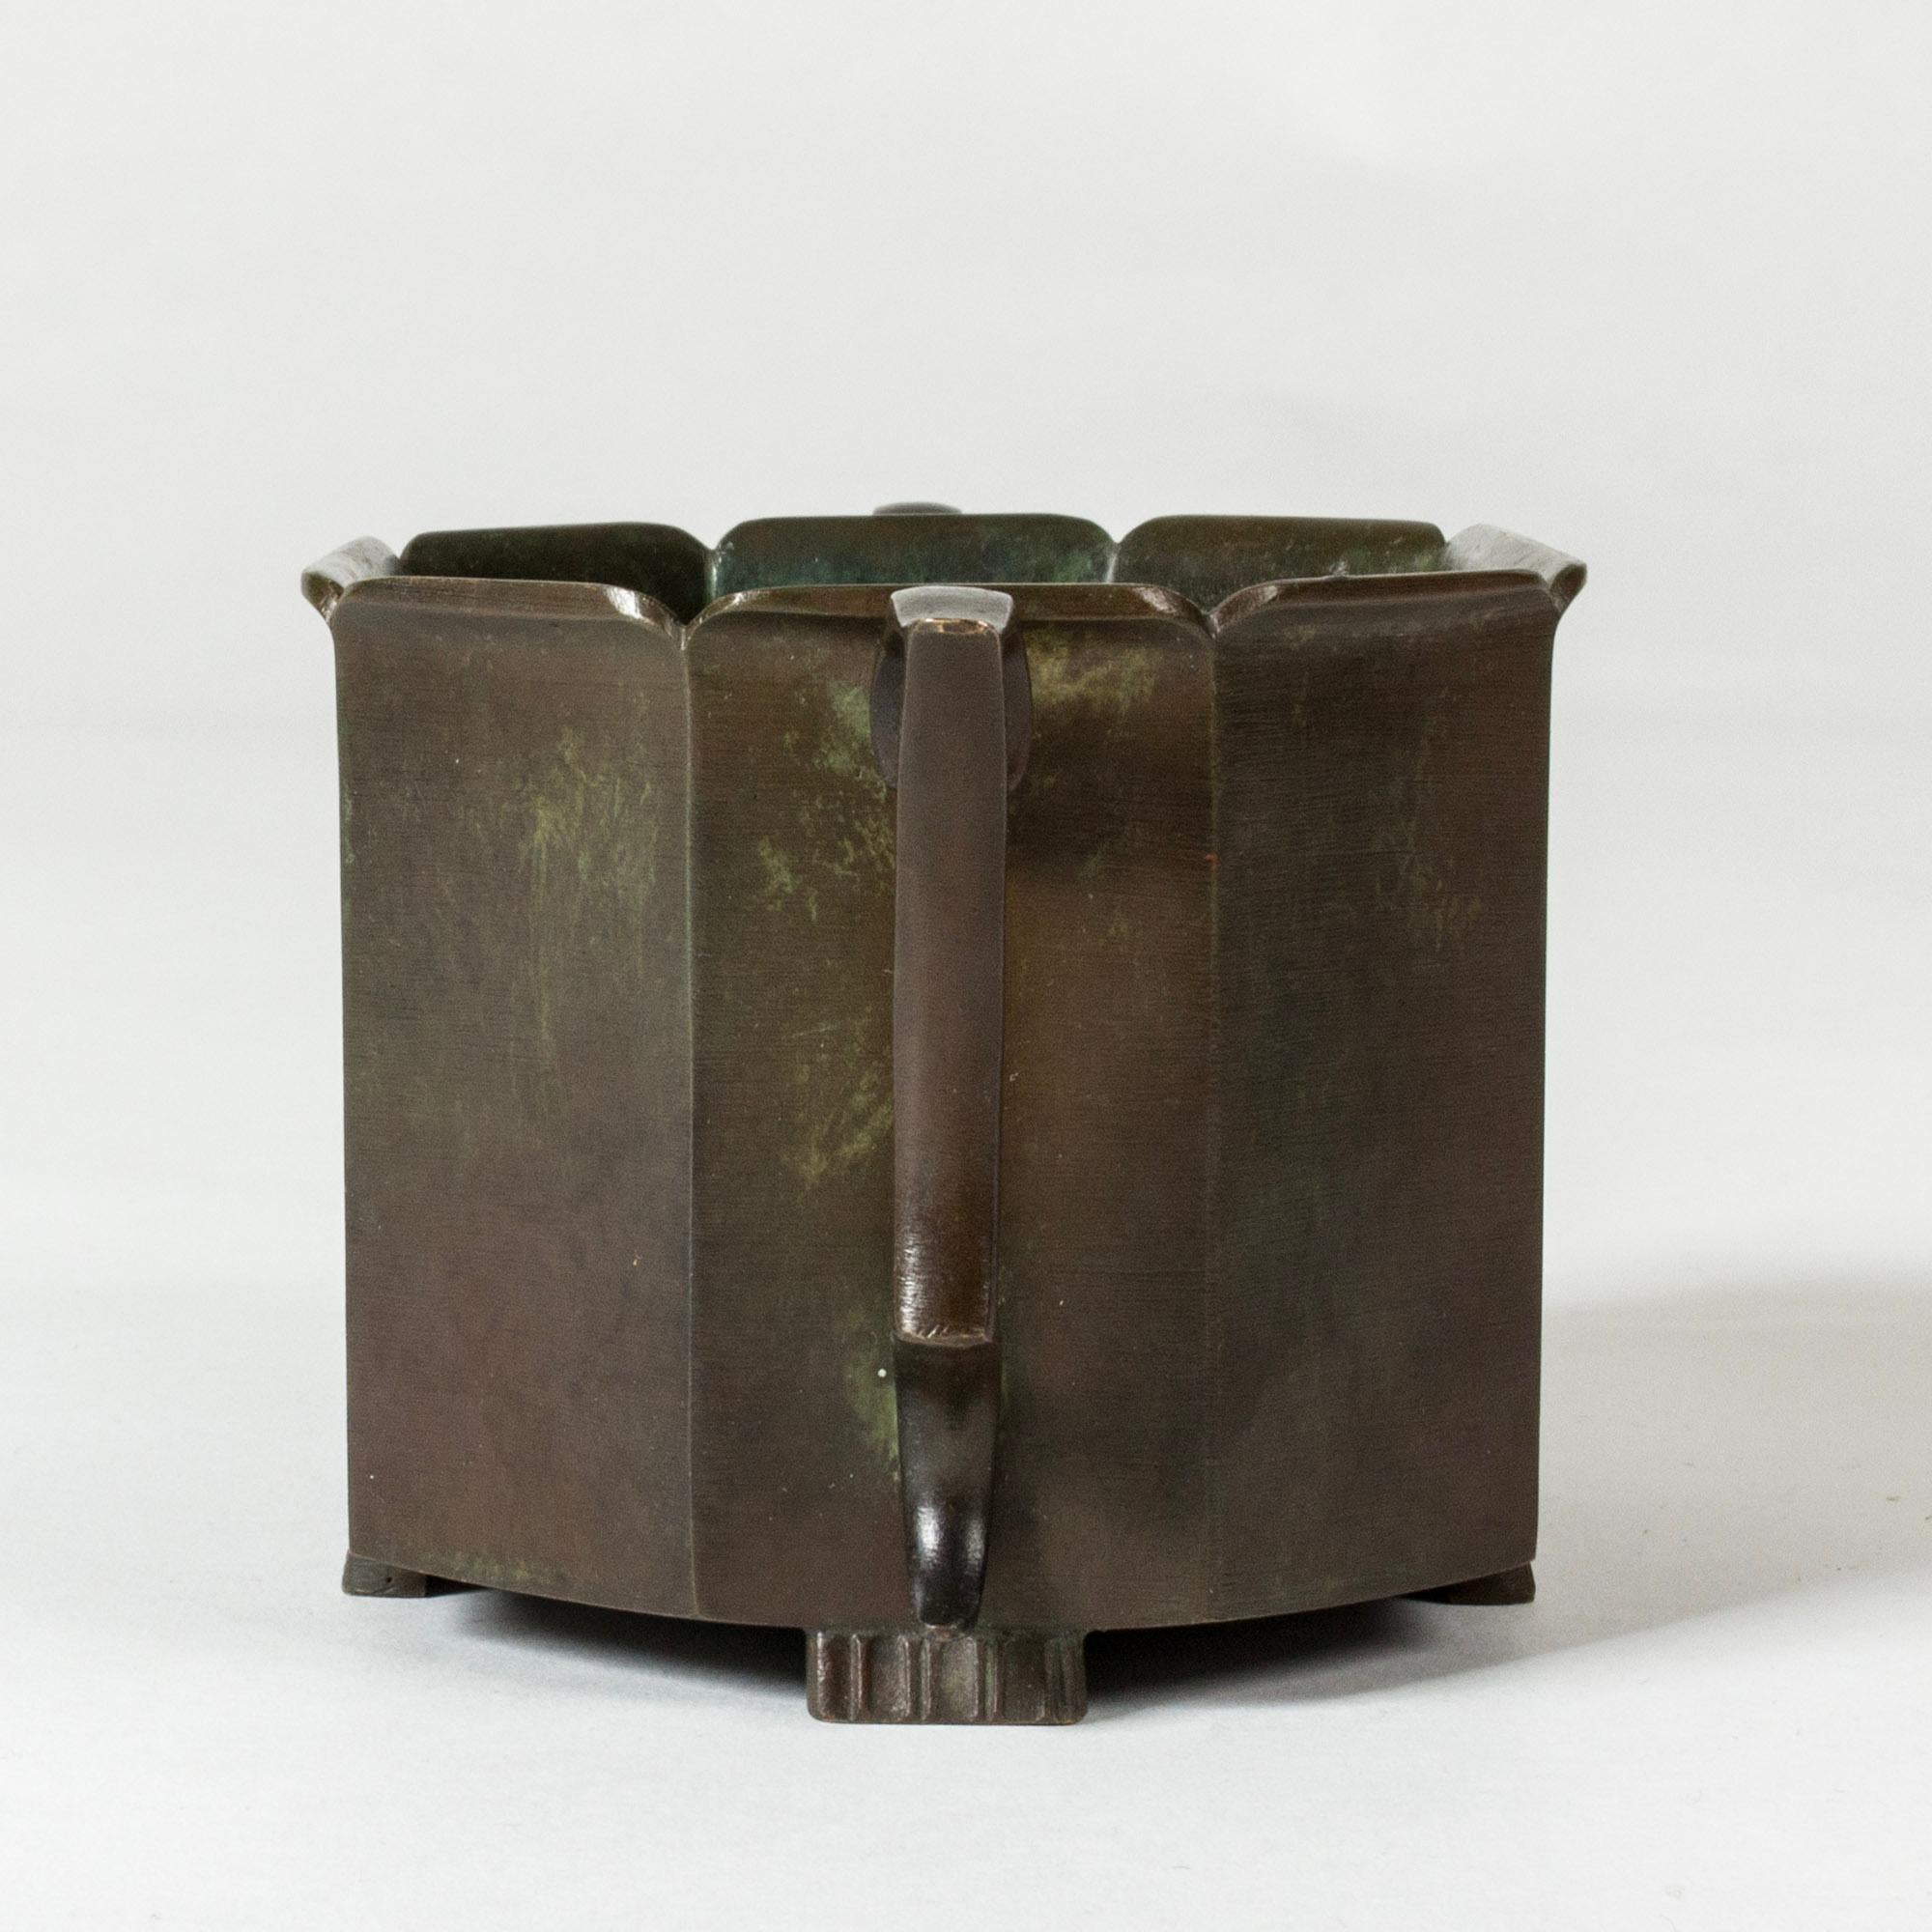 Elegant, small 1930s bronze planter from GAB, in a eight-sided form with lovely elaborate handles.

GAB was founded in Stockholm in 1867 and was an important influence on the Swedish art and crafts and industrial design scenes for more than a